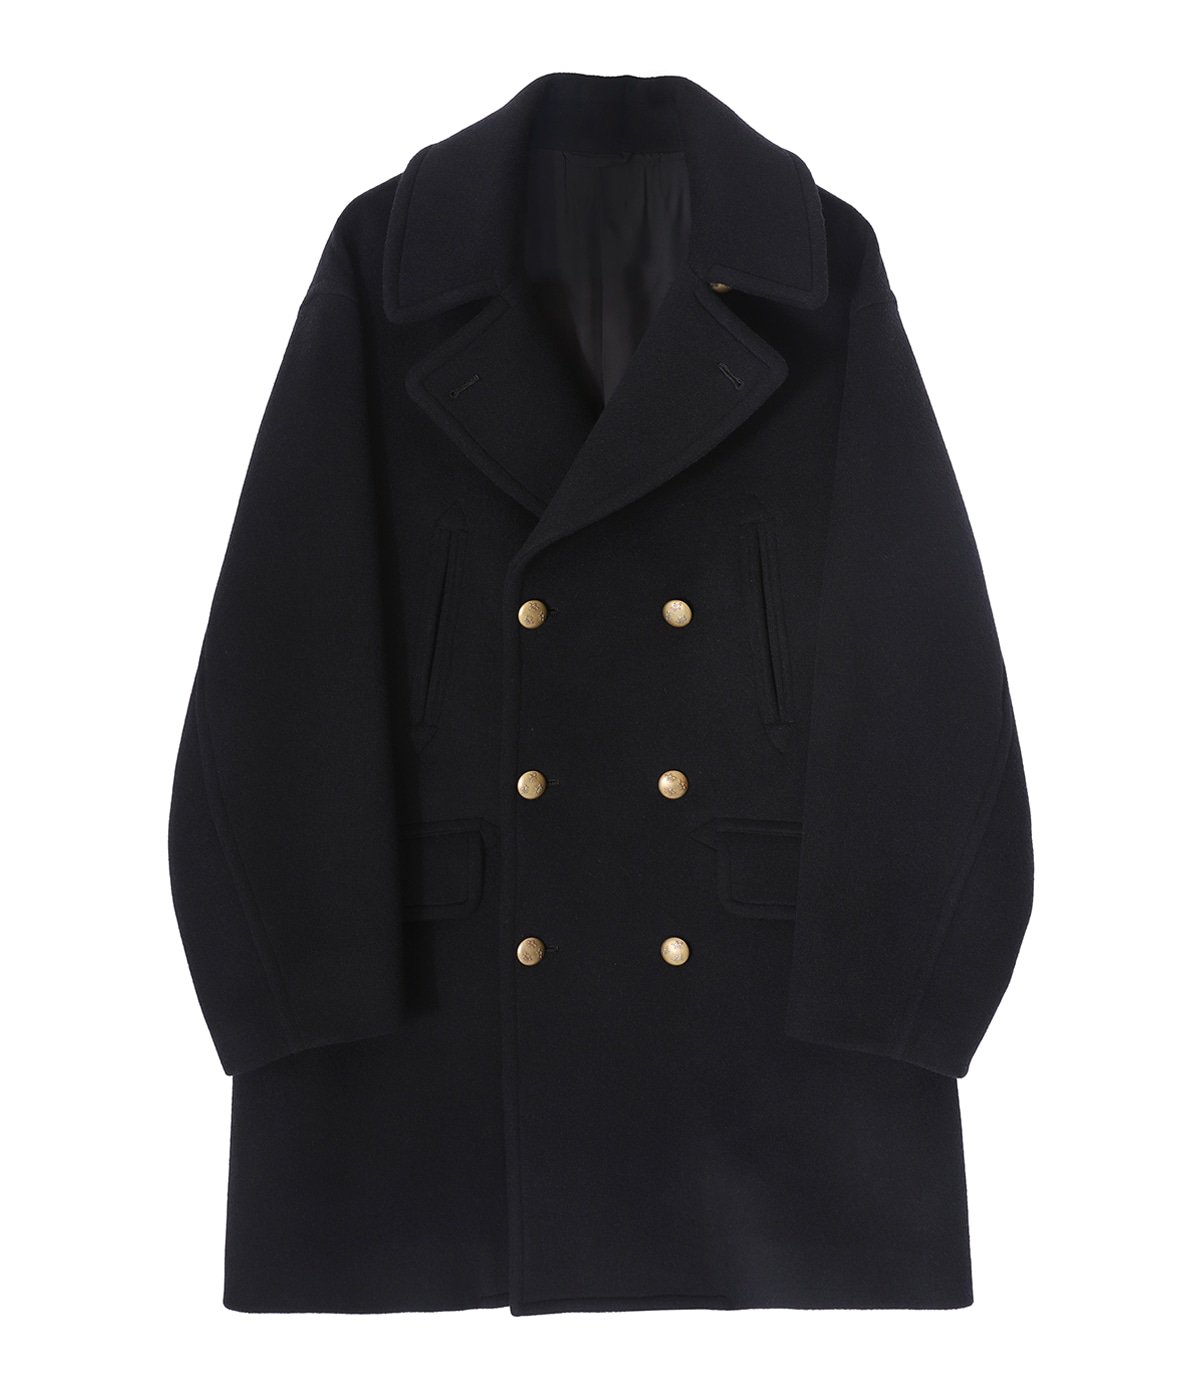 【ONLY ARK】別注 Wool Cashmere Pea Coat